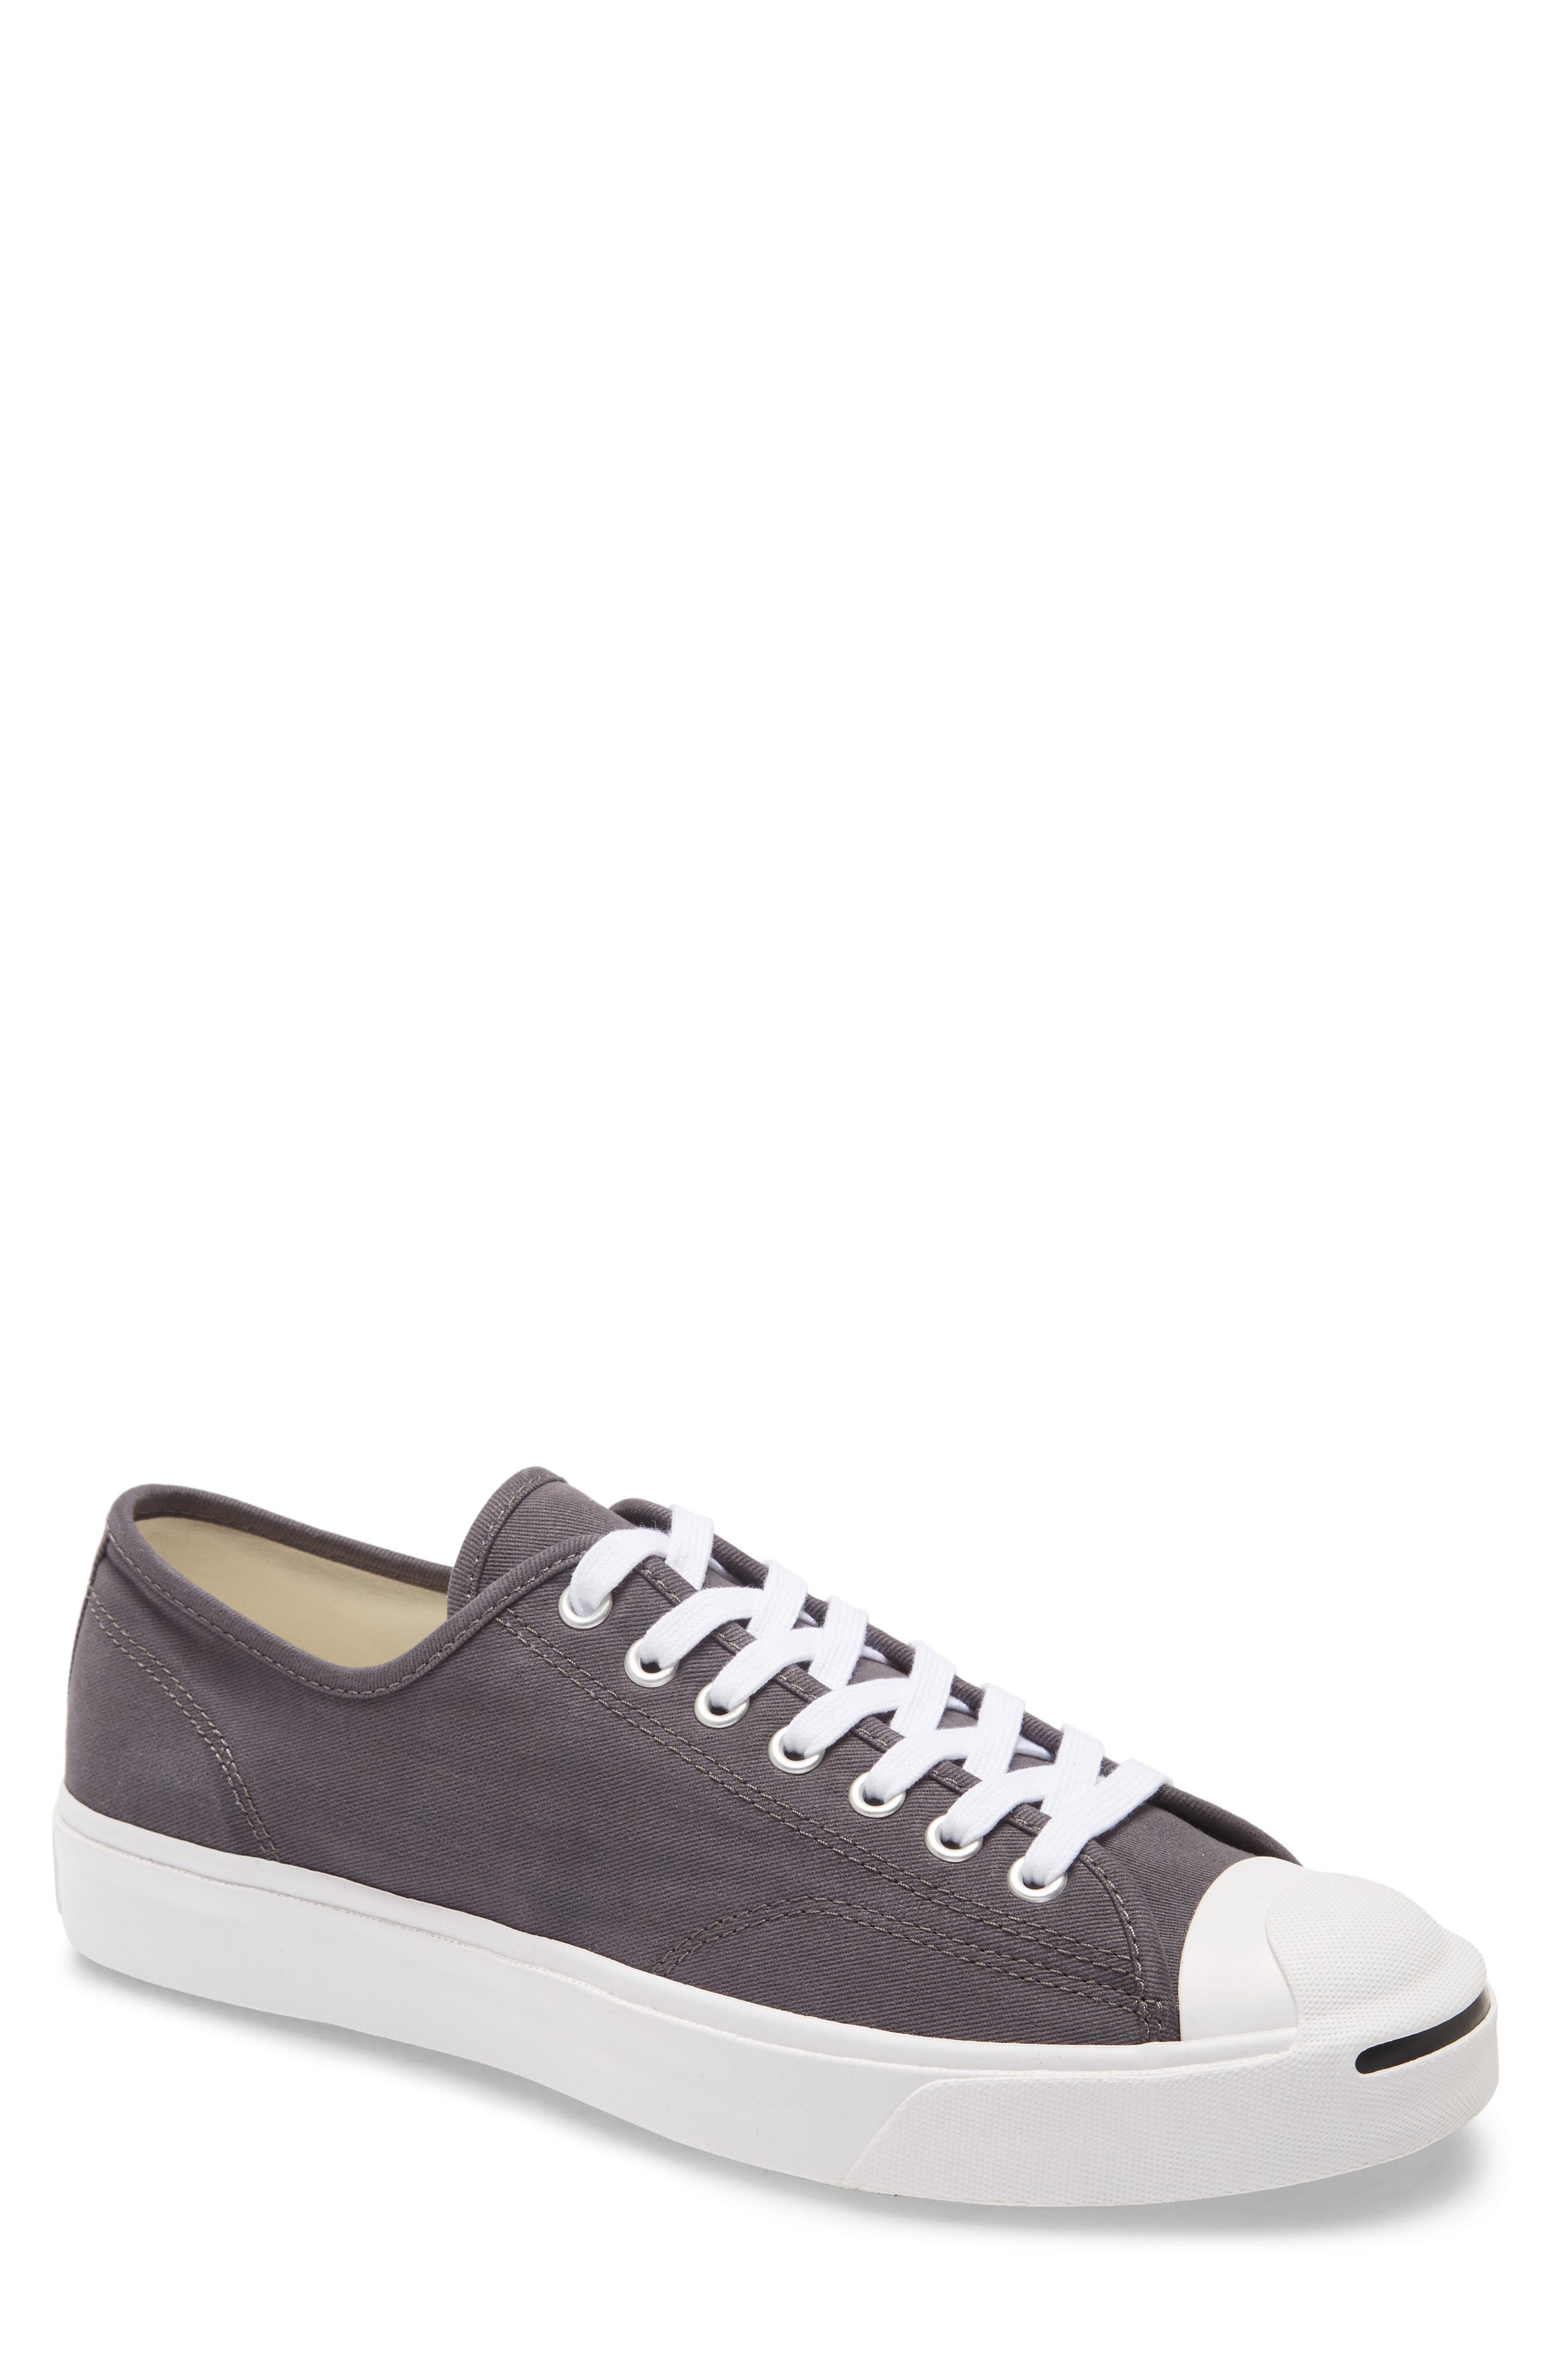 jack purcell converse nordstrom